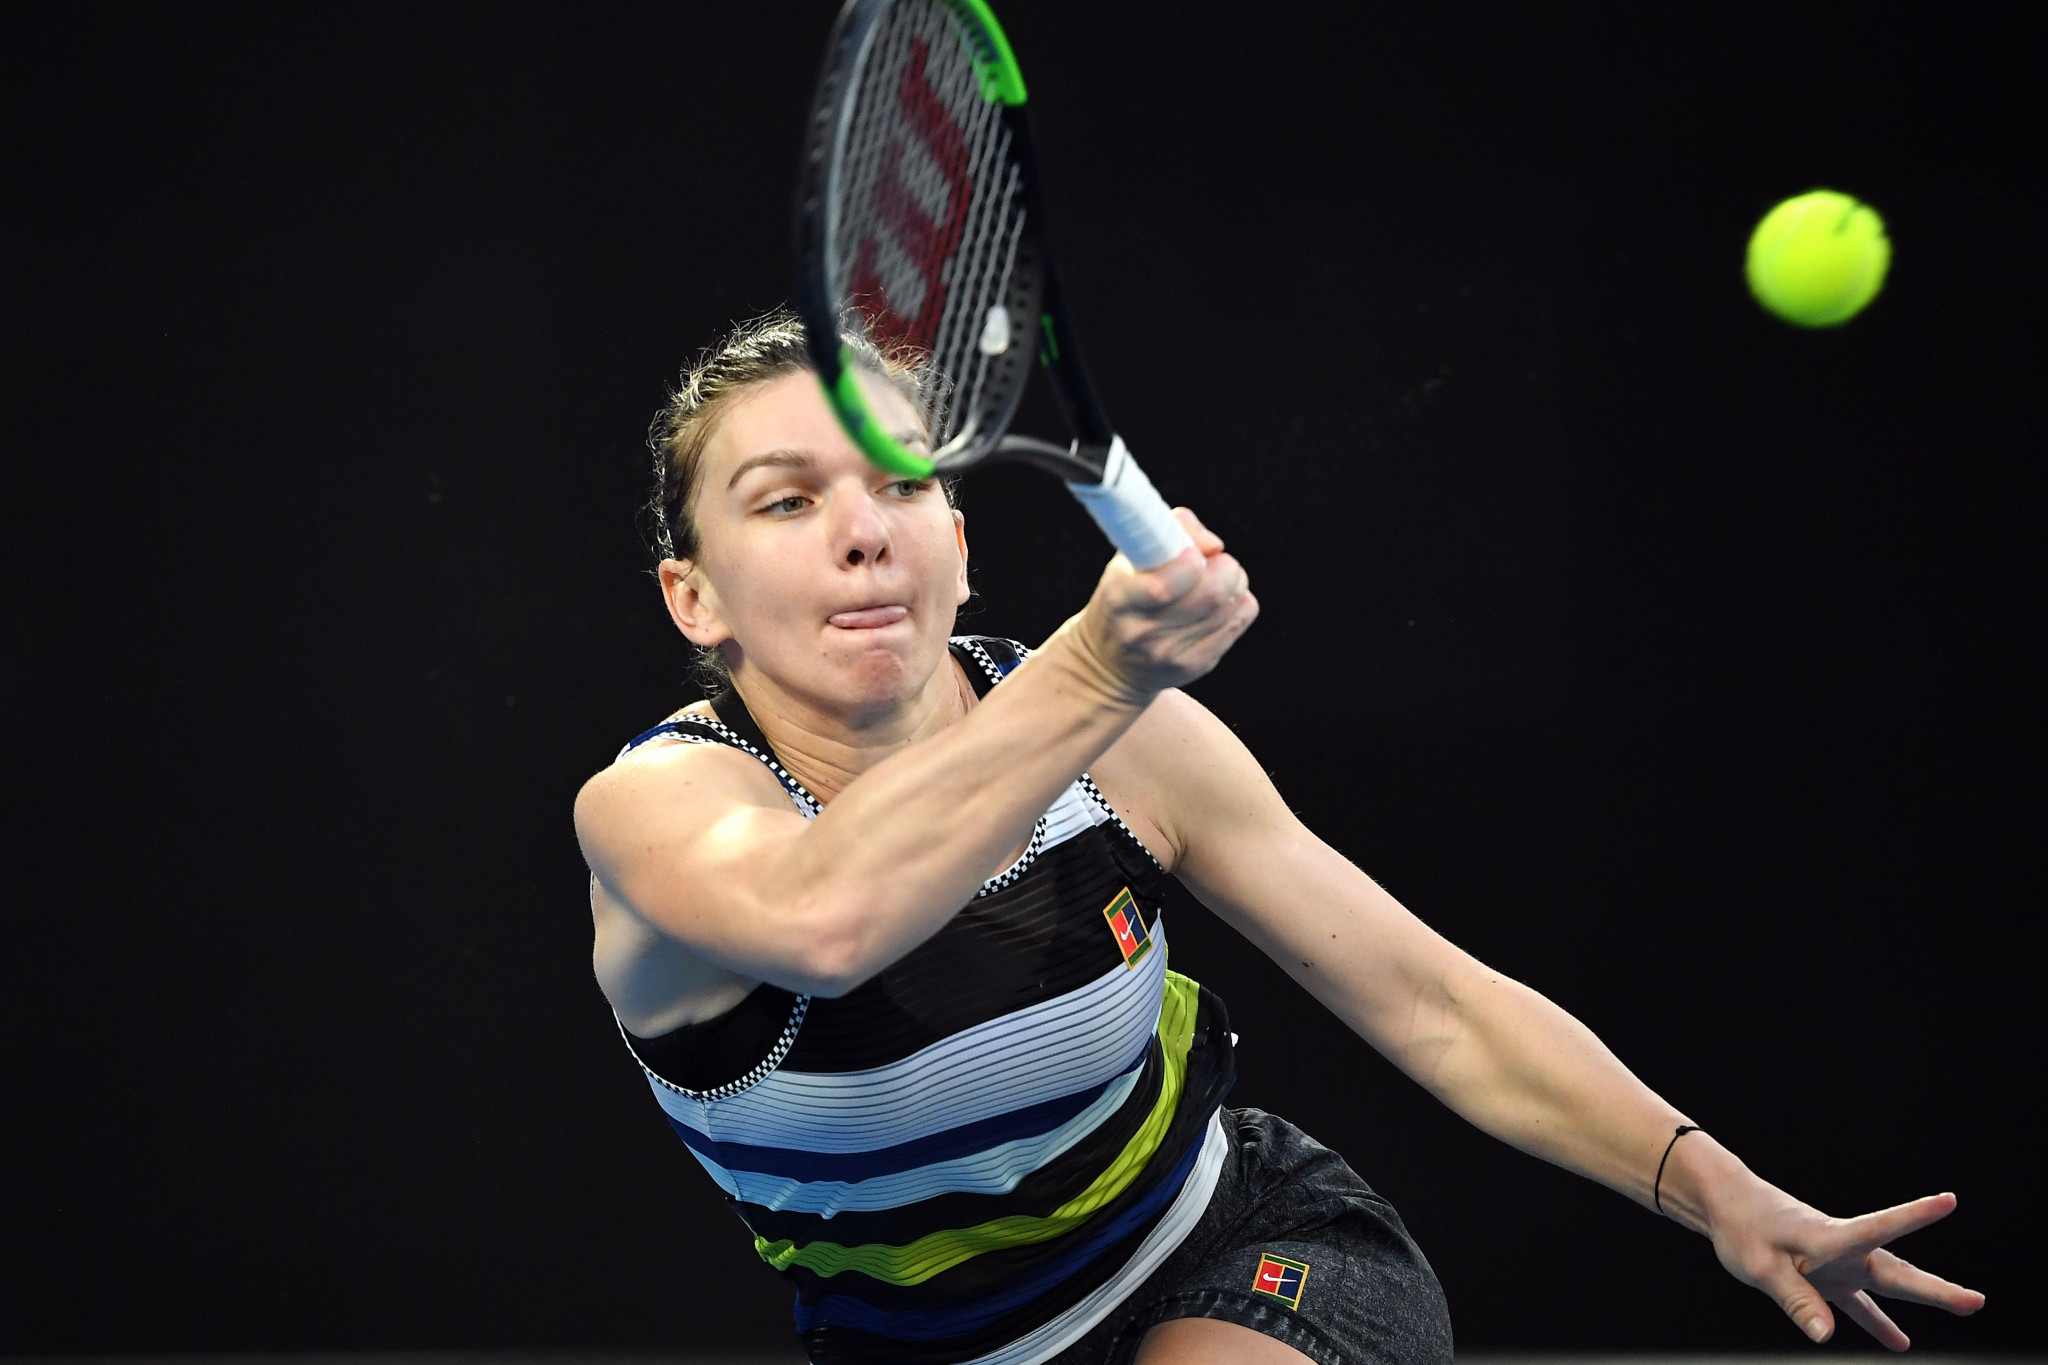 Halep targeting upset as Romania prepare to face Czech Republic in Fed Cup